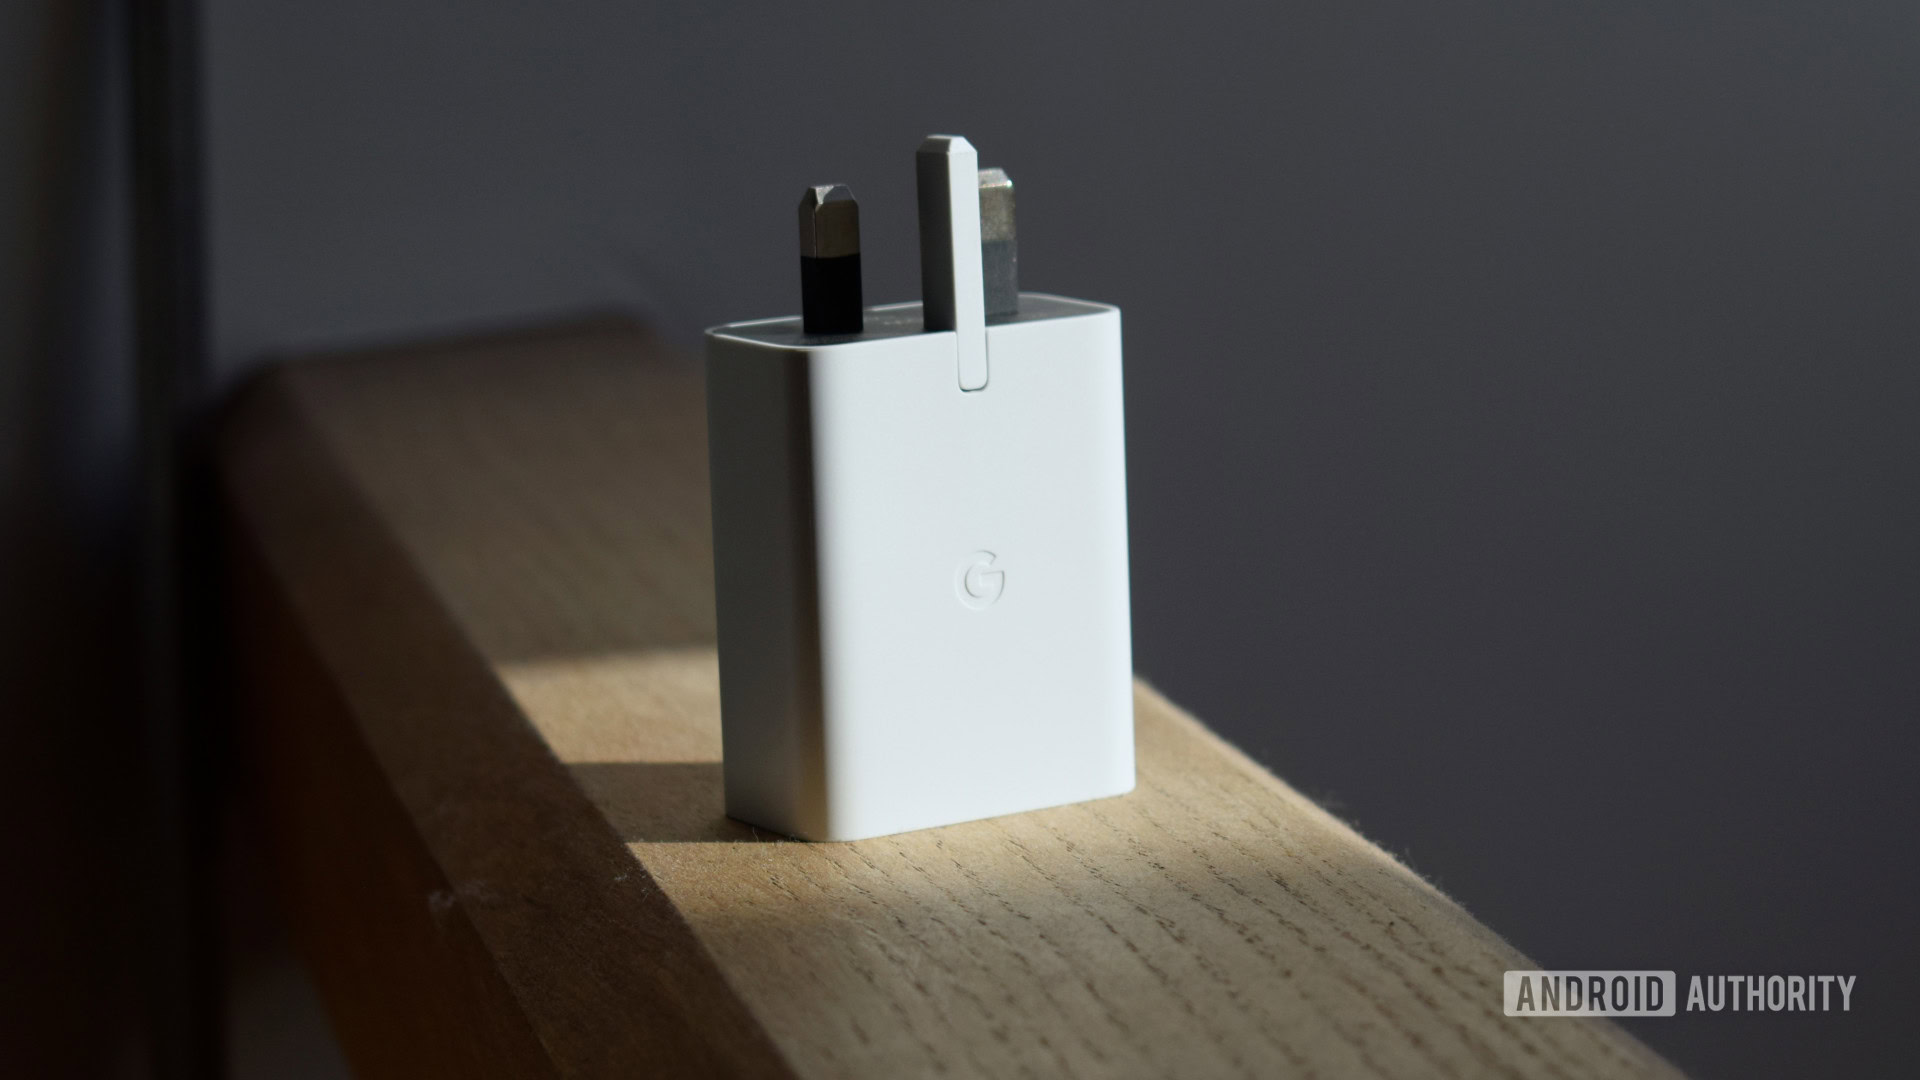 The Google 30W USB-C power adapter stands upright on a wooden beam